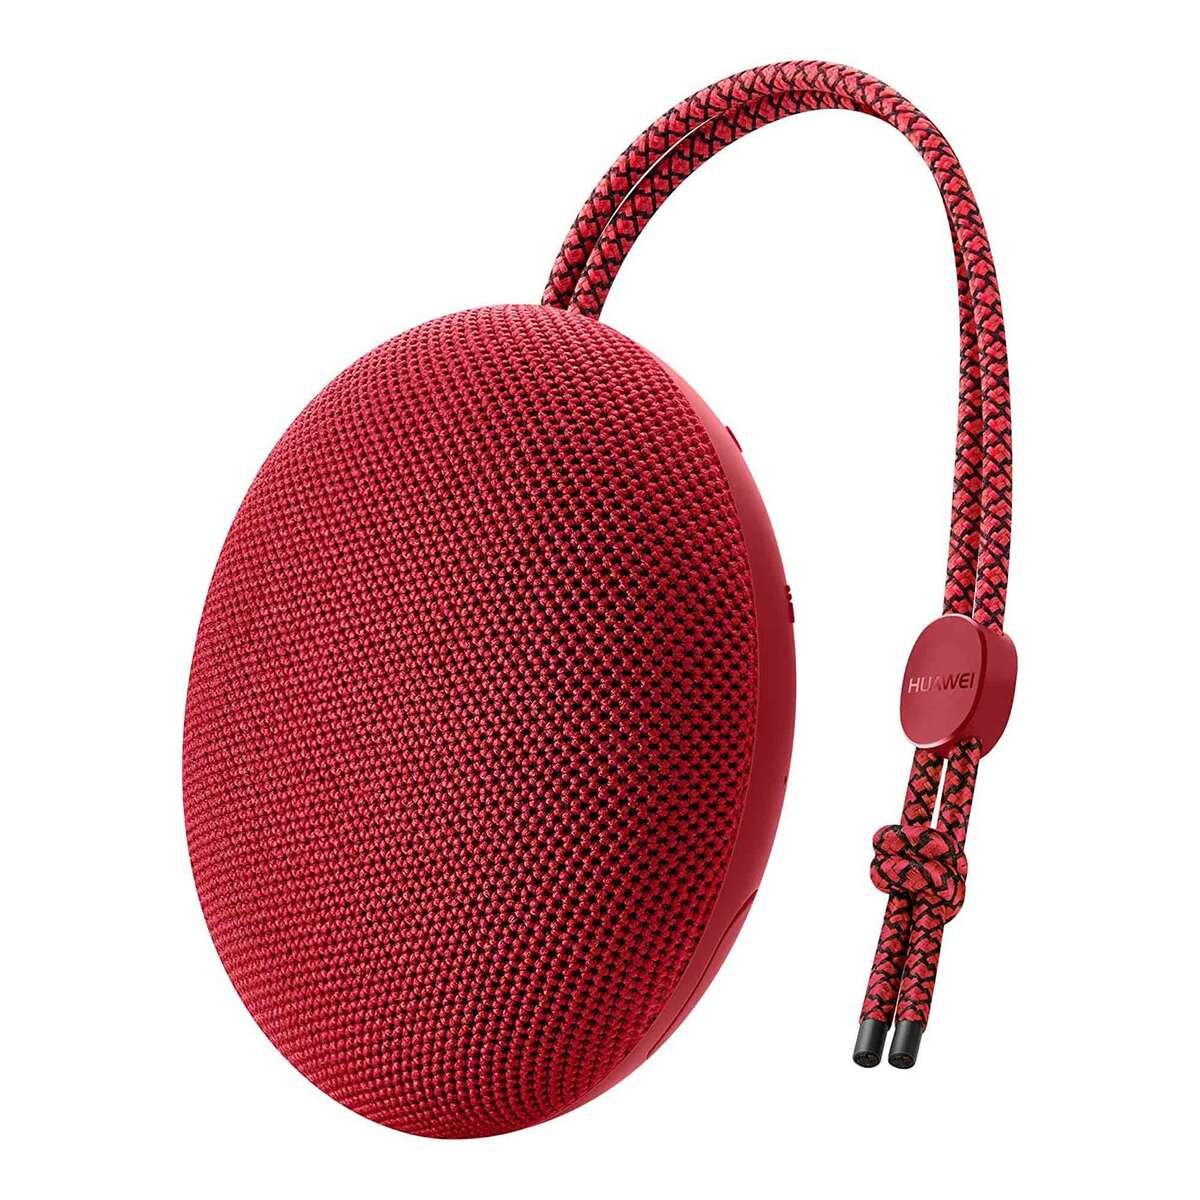 Huawei SoundStone Portable Bluetooth Speaker CM51 Red